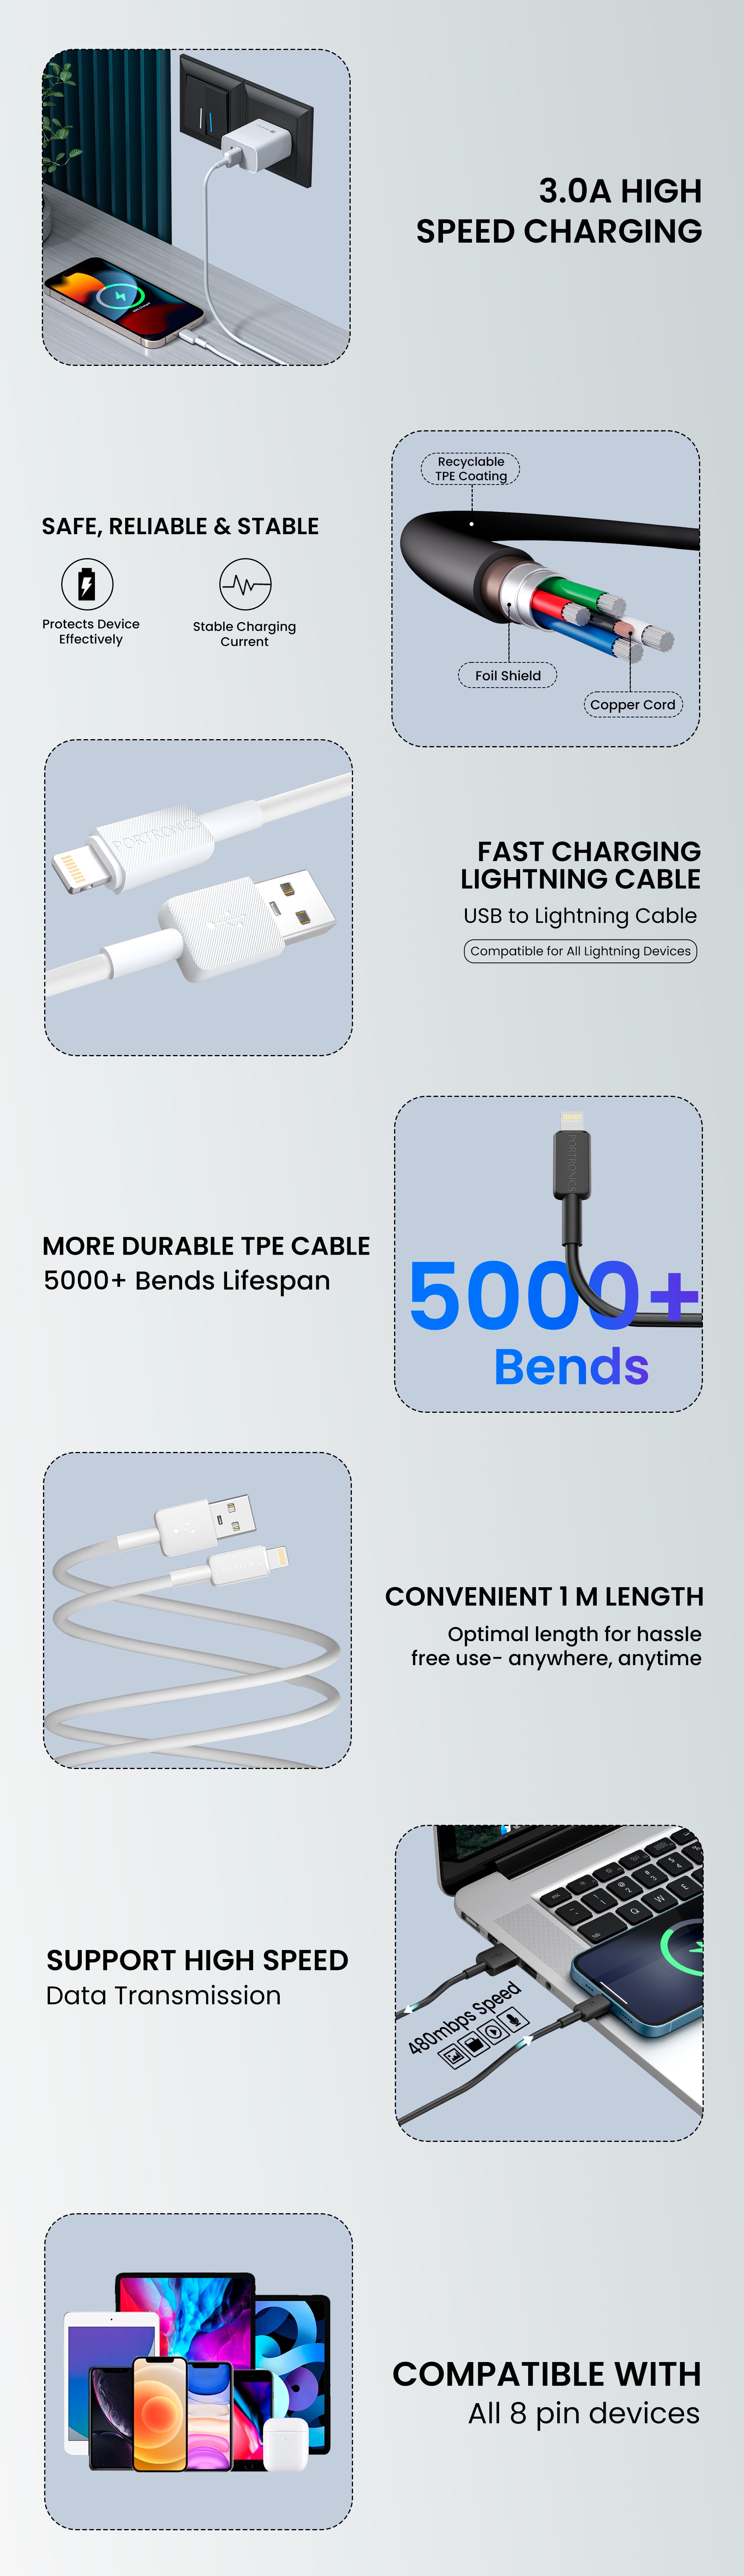 Portronics Konnect Link - 8 pin USB to 8 Pin Fast charging Cable for Iphone| fast charging cable| lighting cable